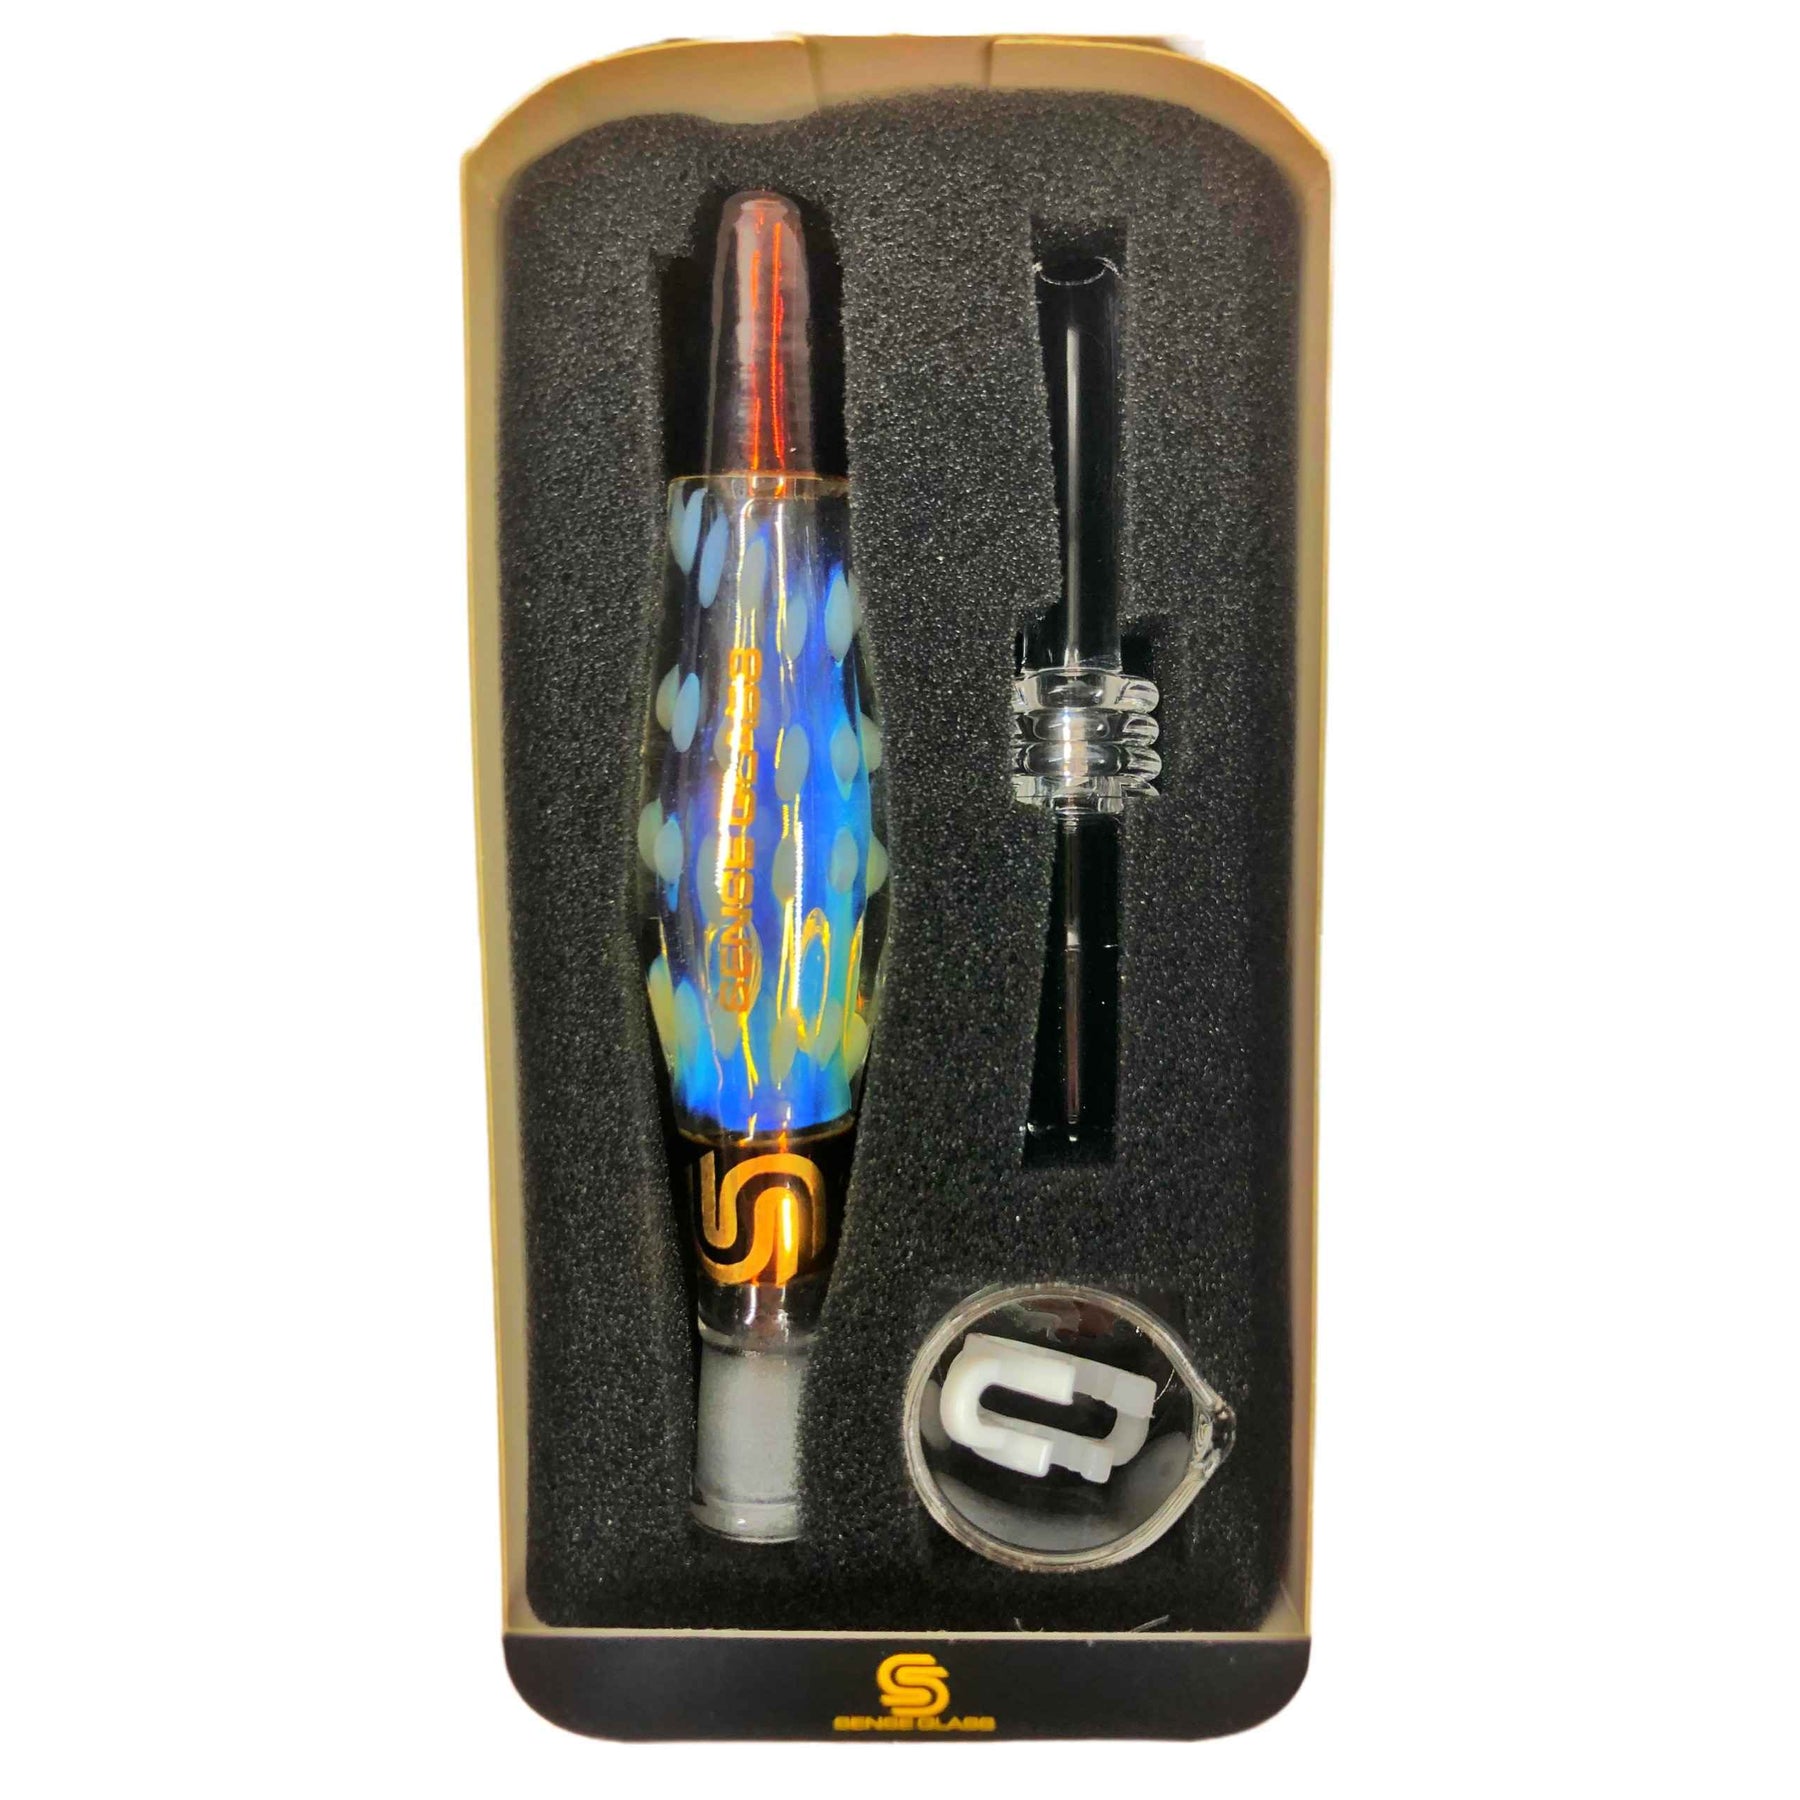 Sense Glass Nectar Collector Packaged View